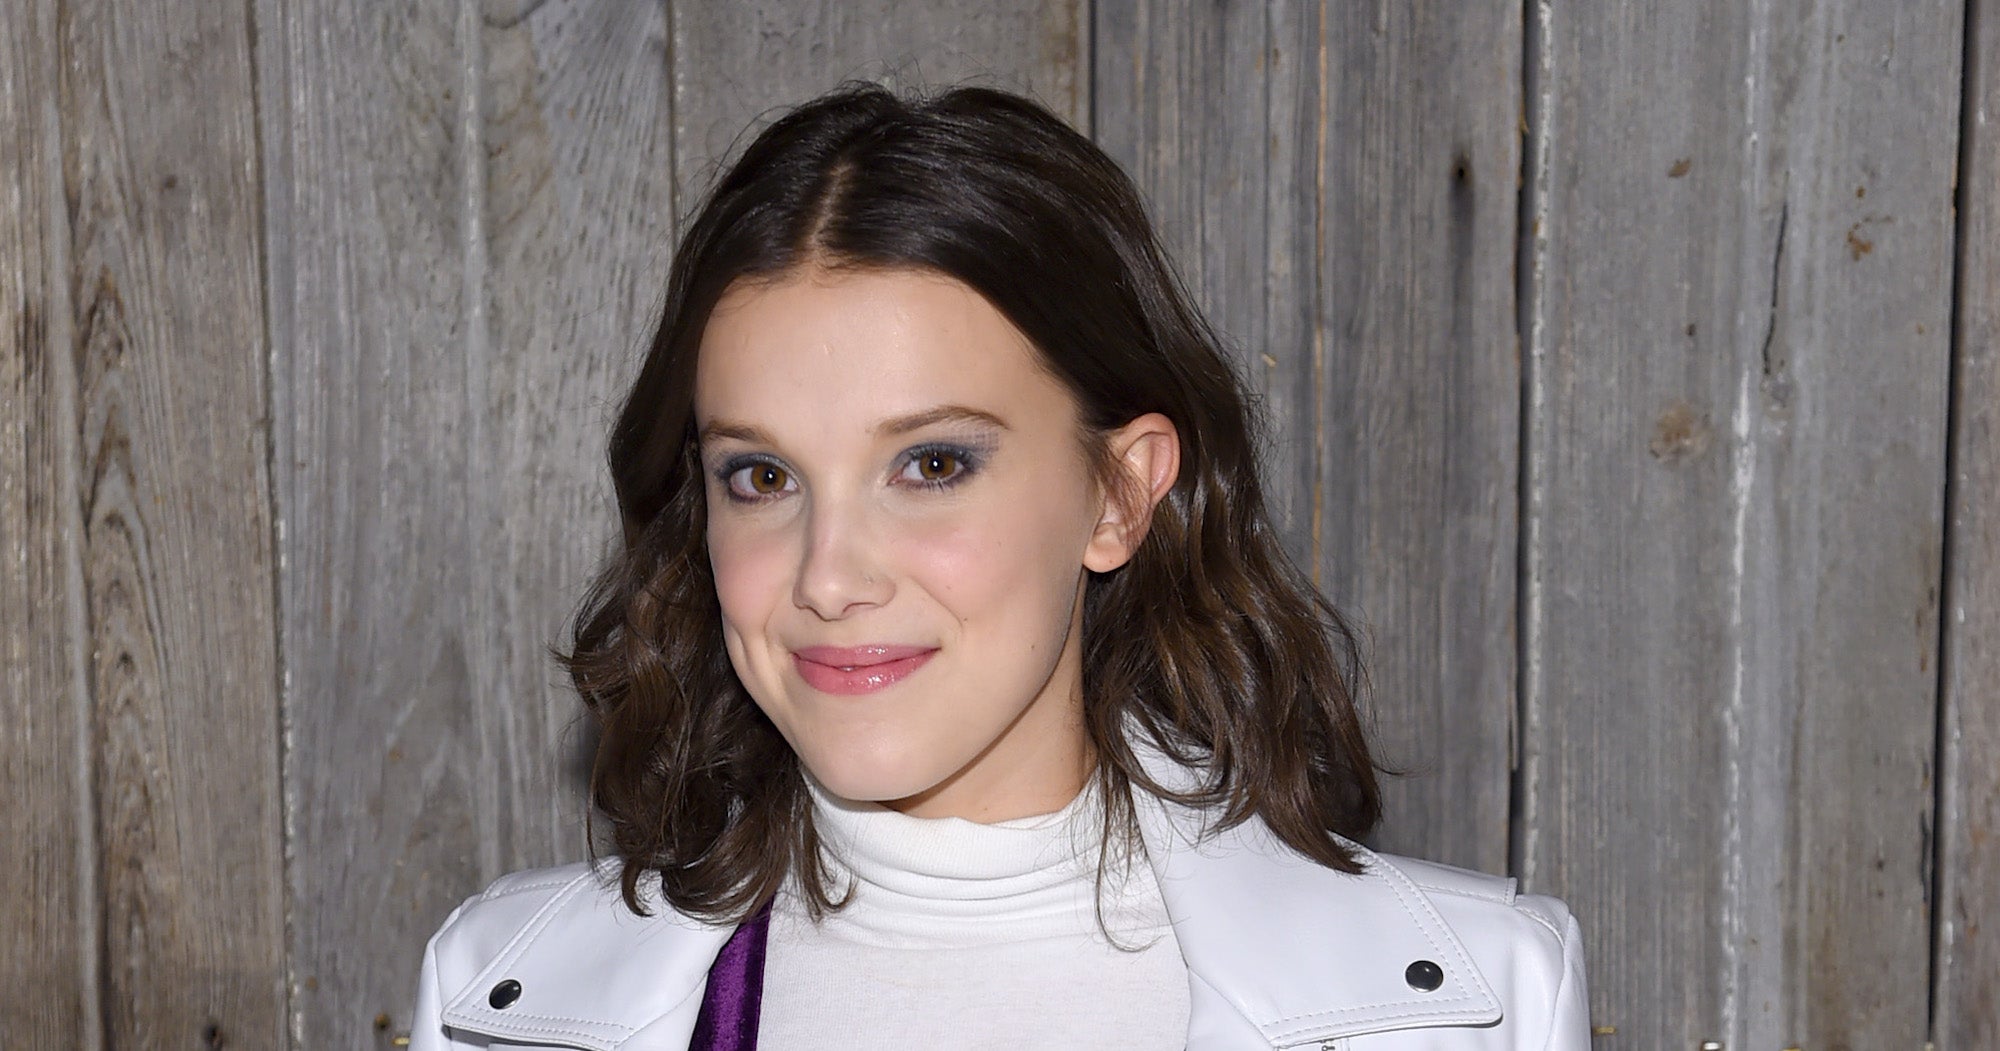 Millie Bobby Brown Just Dyed Her Hair Bright Blonde